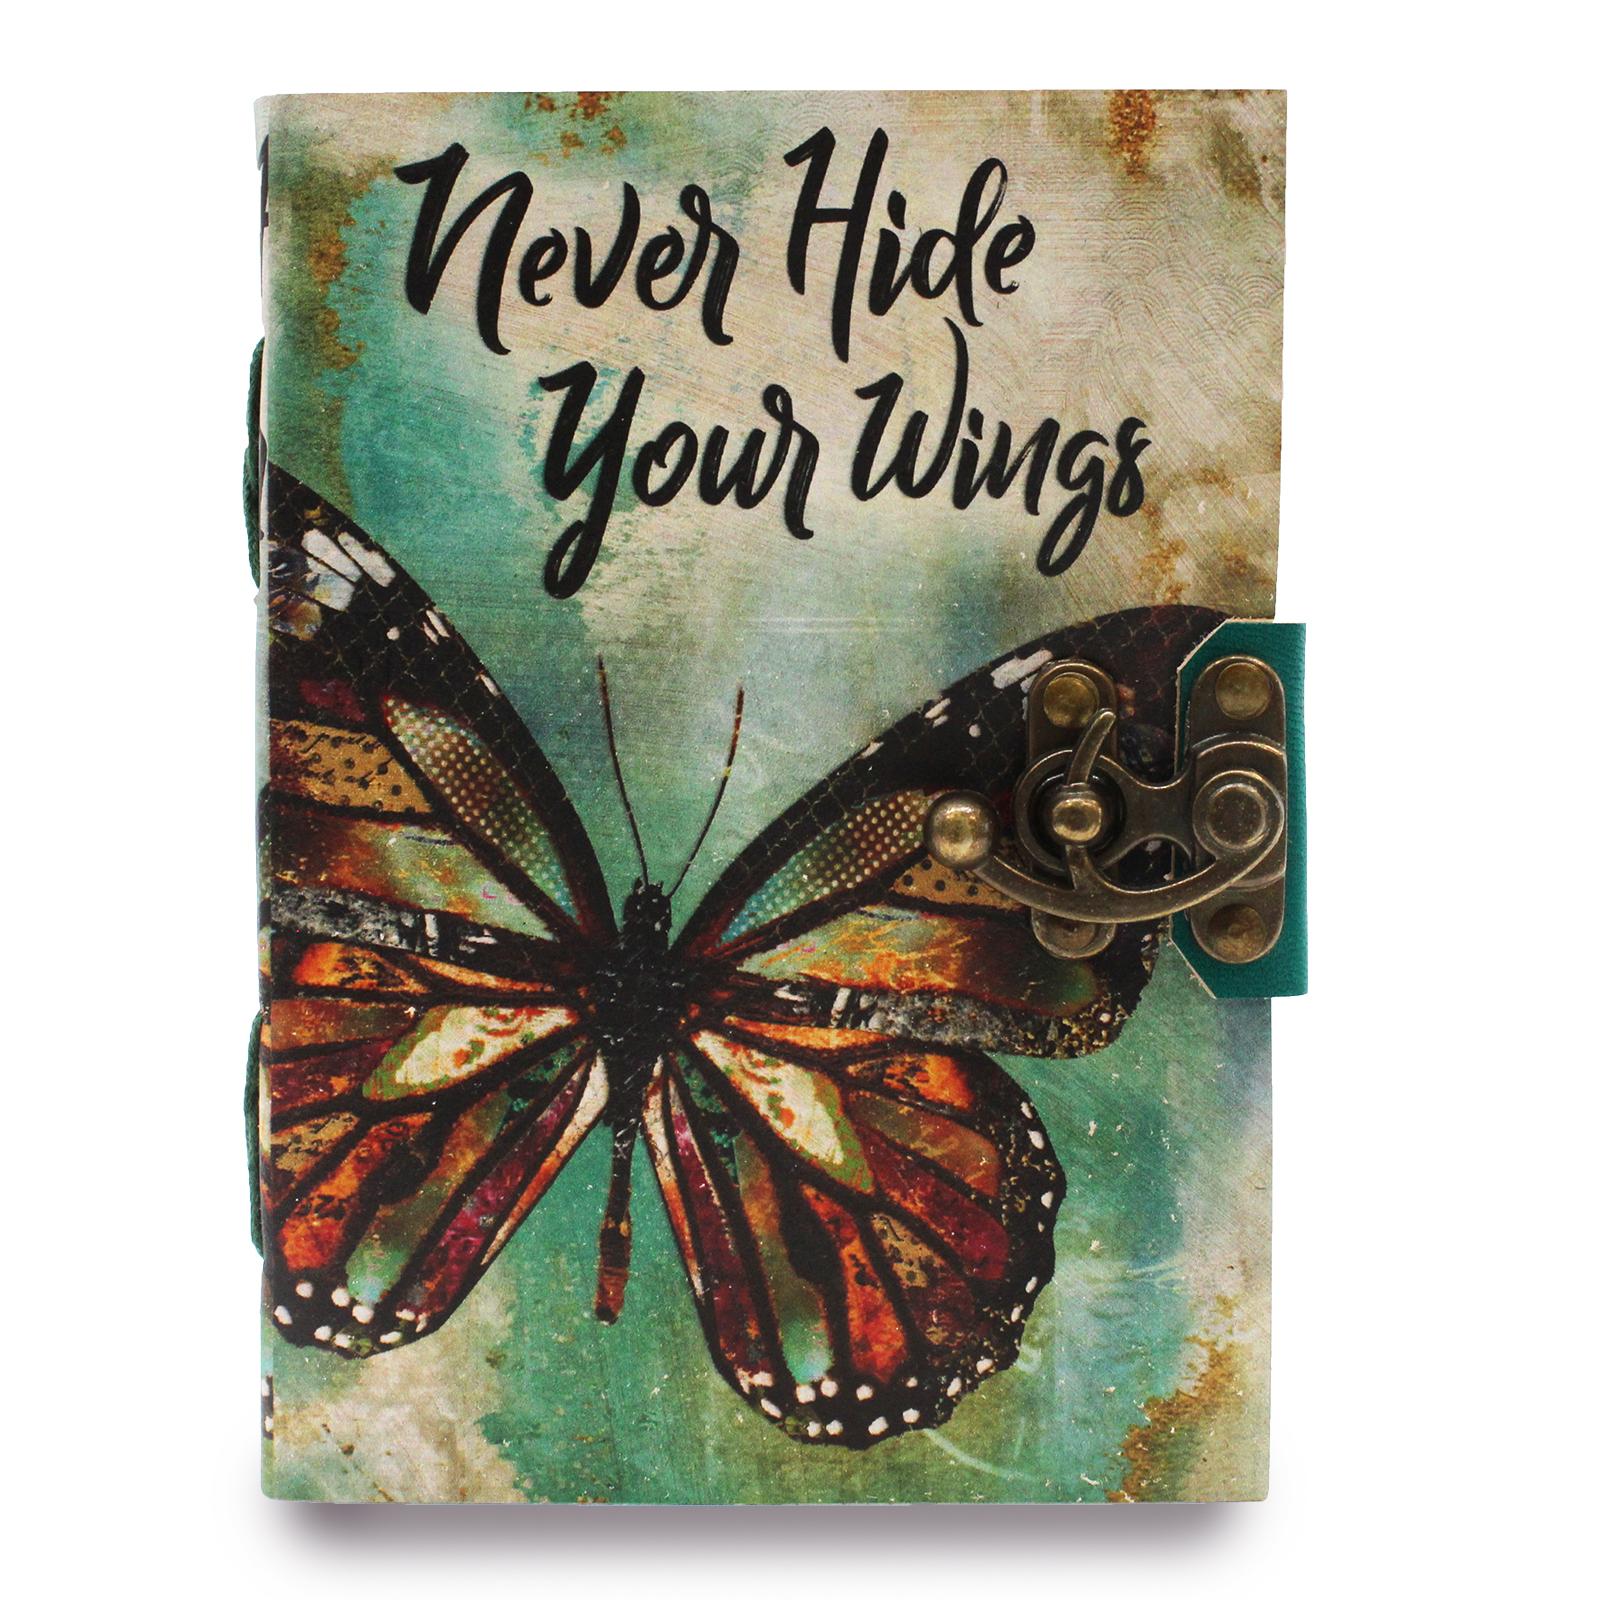 Notebook - leather "Never hide your wings" deckle edge